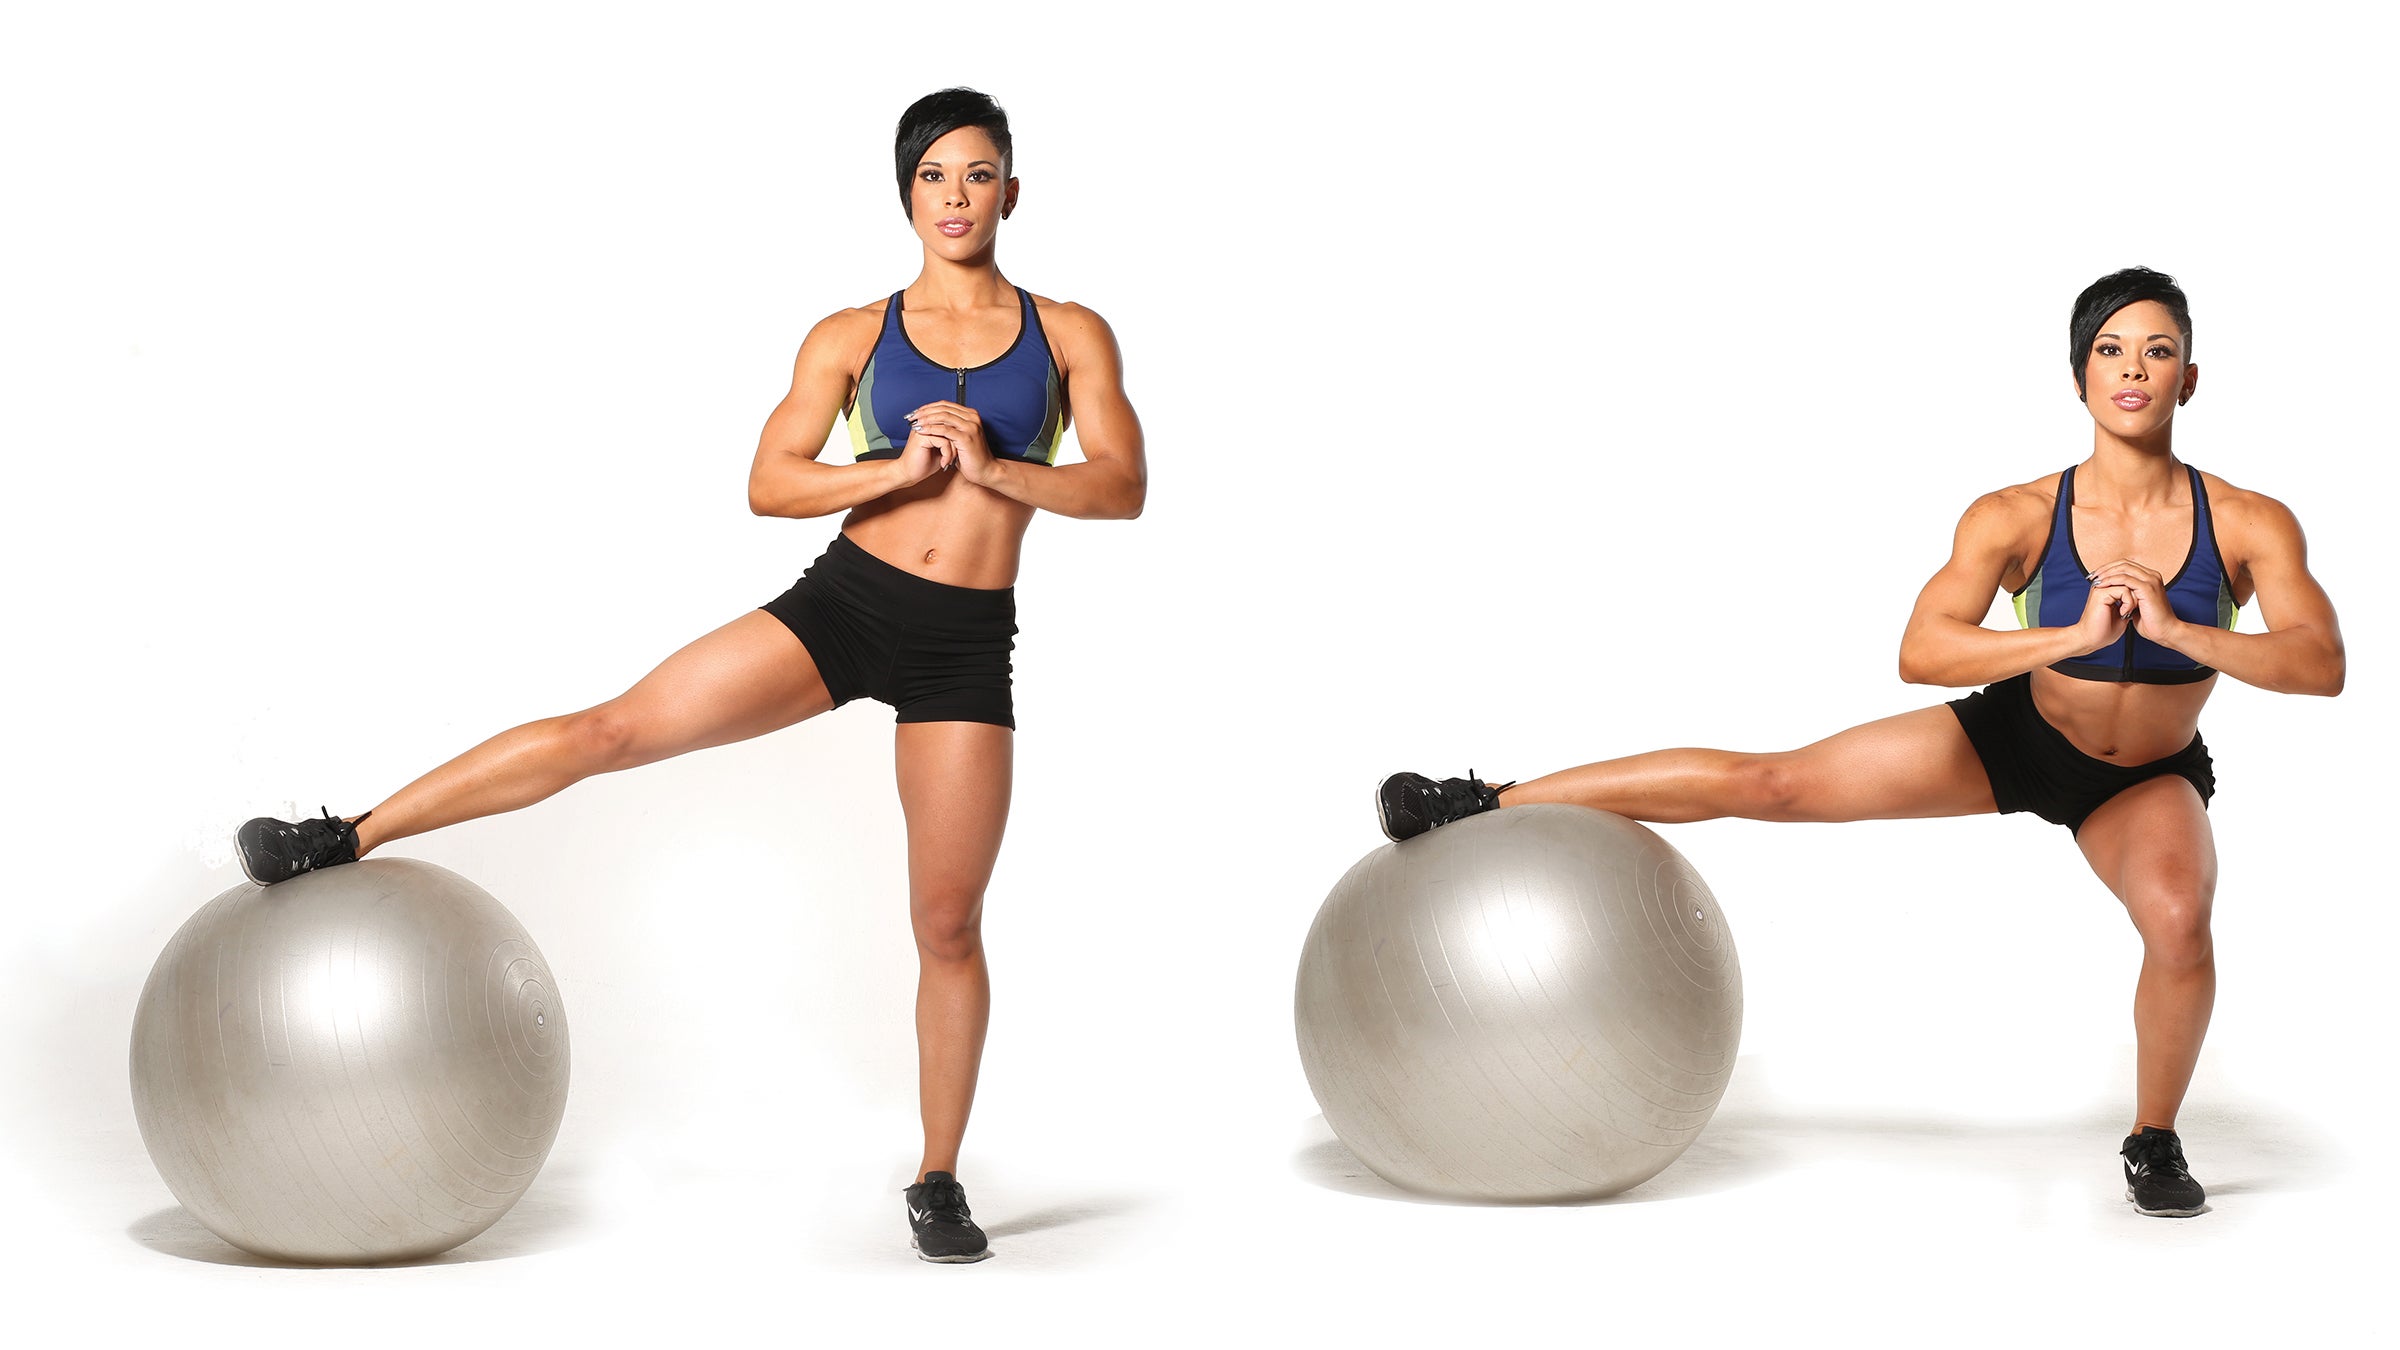 inner thigh workouts with ball